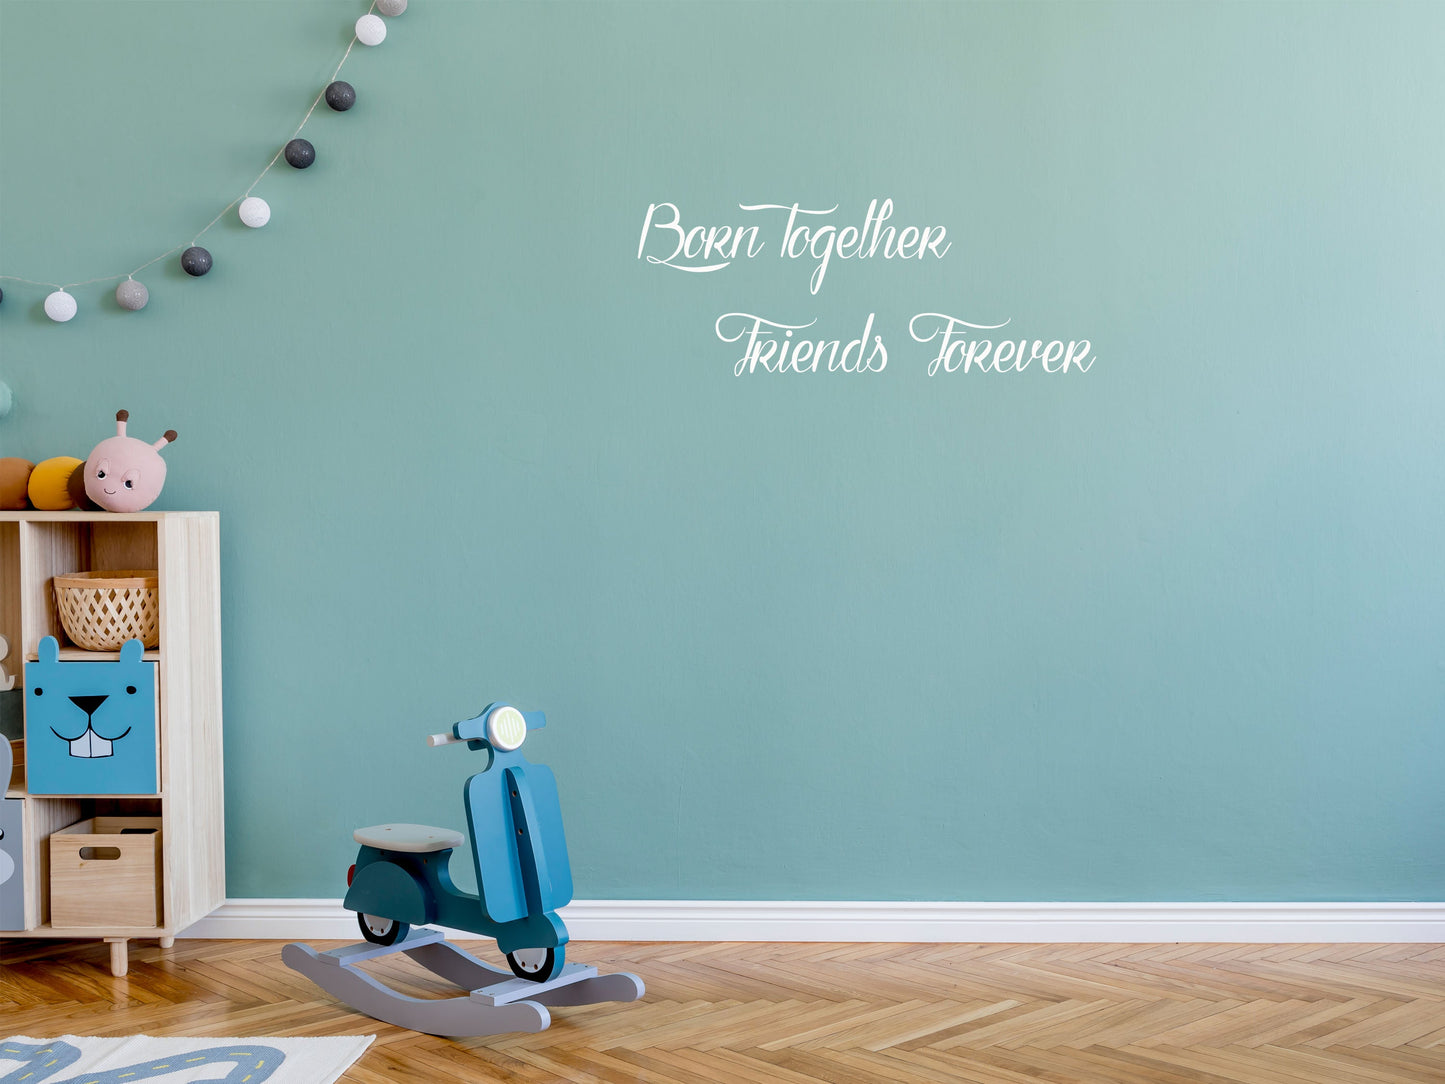 Born Together Friends Forever Twins Wall Decal Quote - Inspirational Wall Signs Vinyl Wall Decal Inspirational Wall Signs 